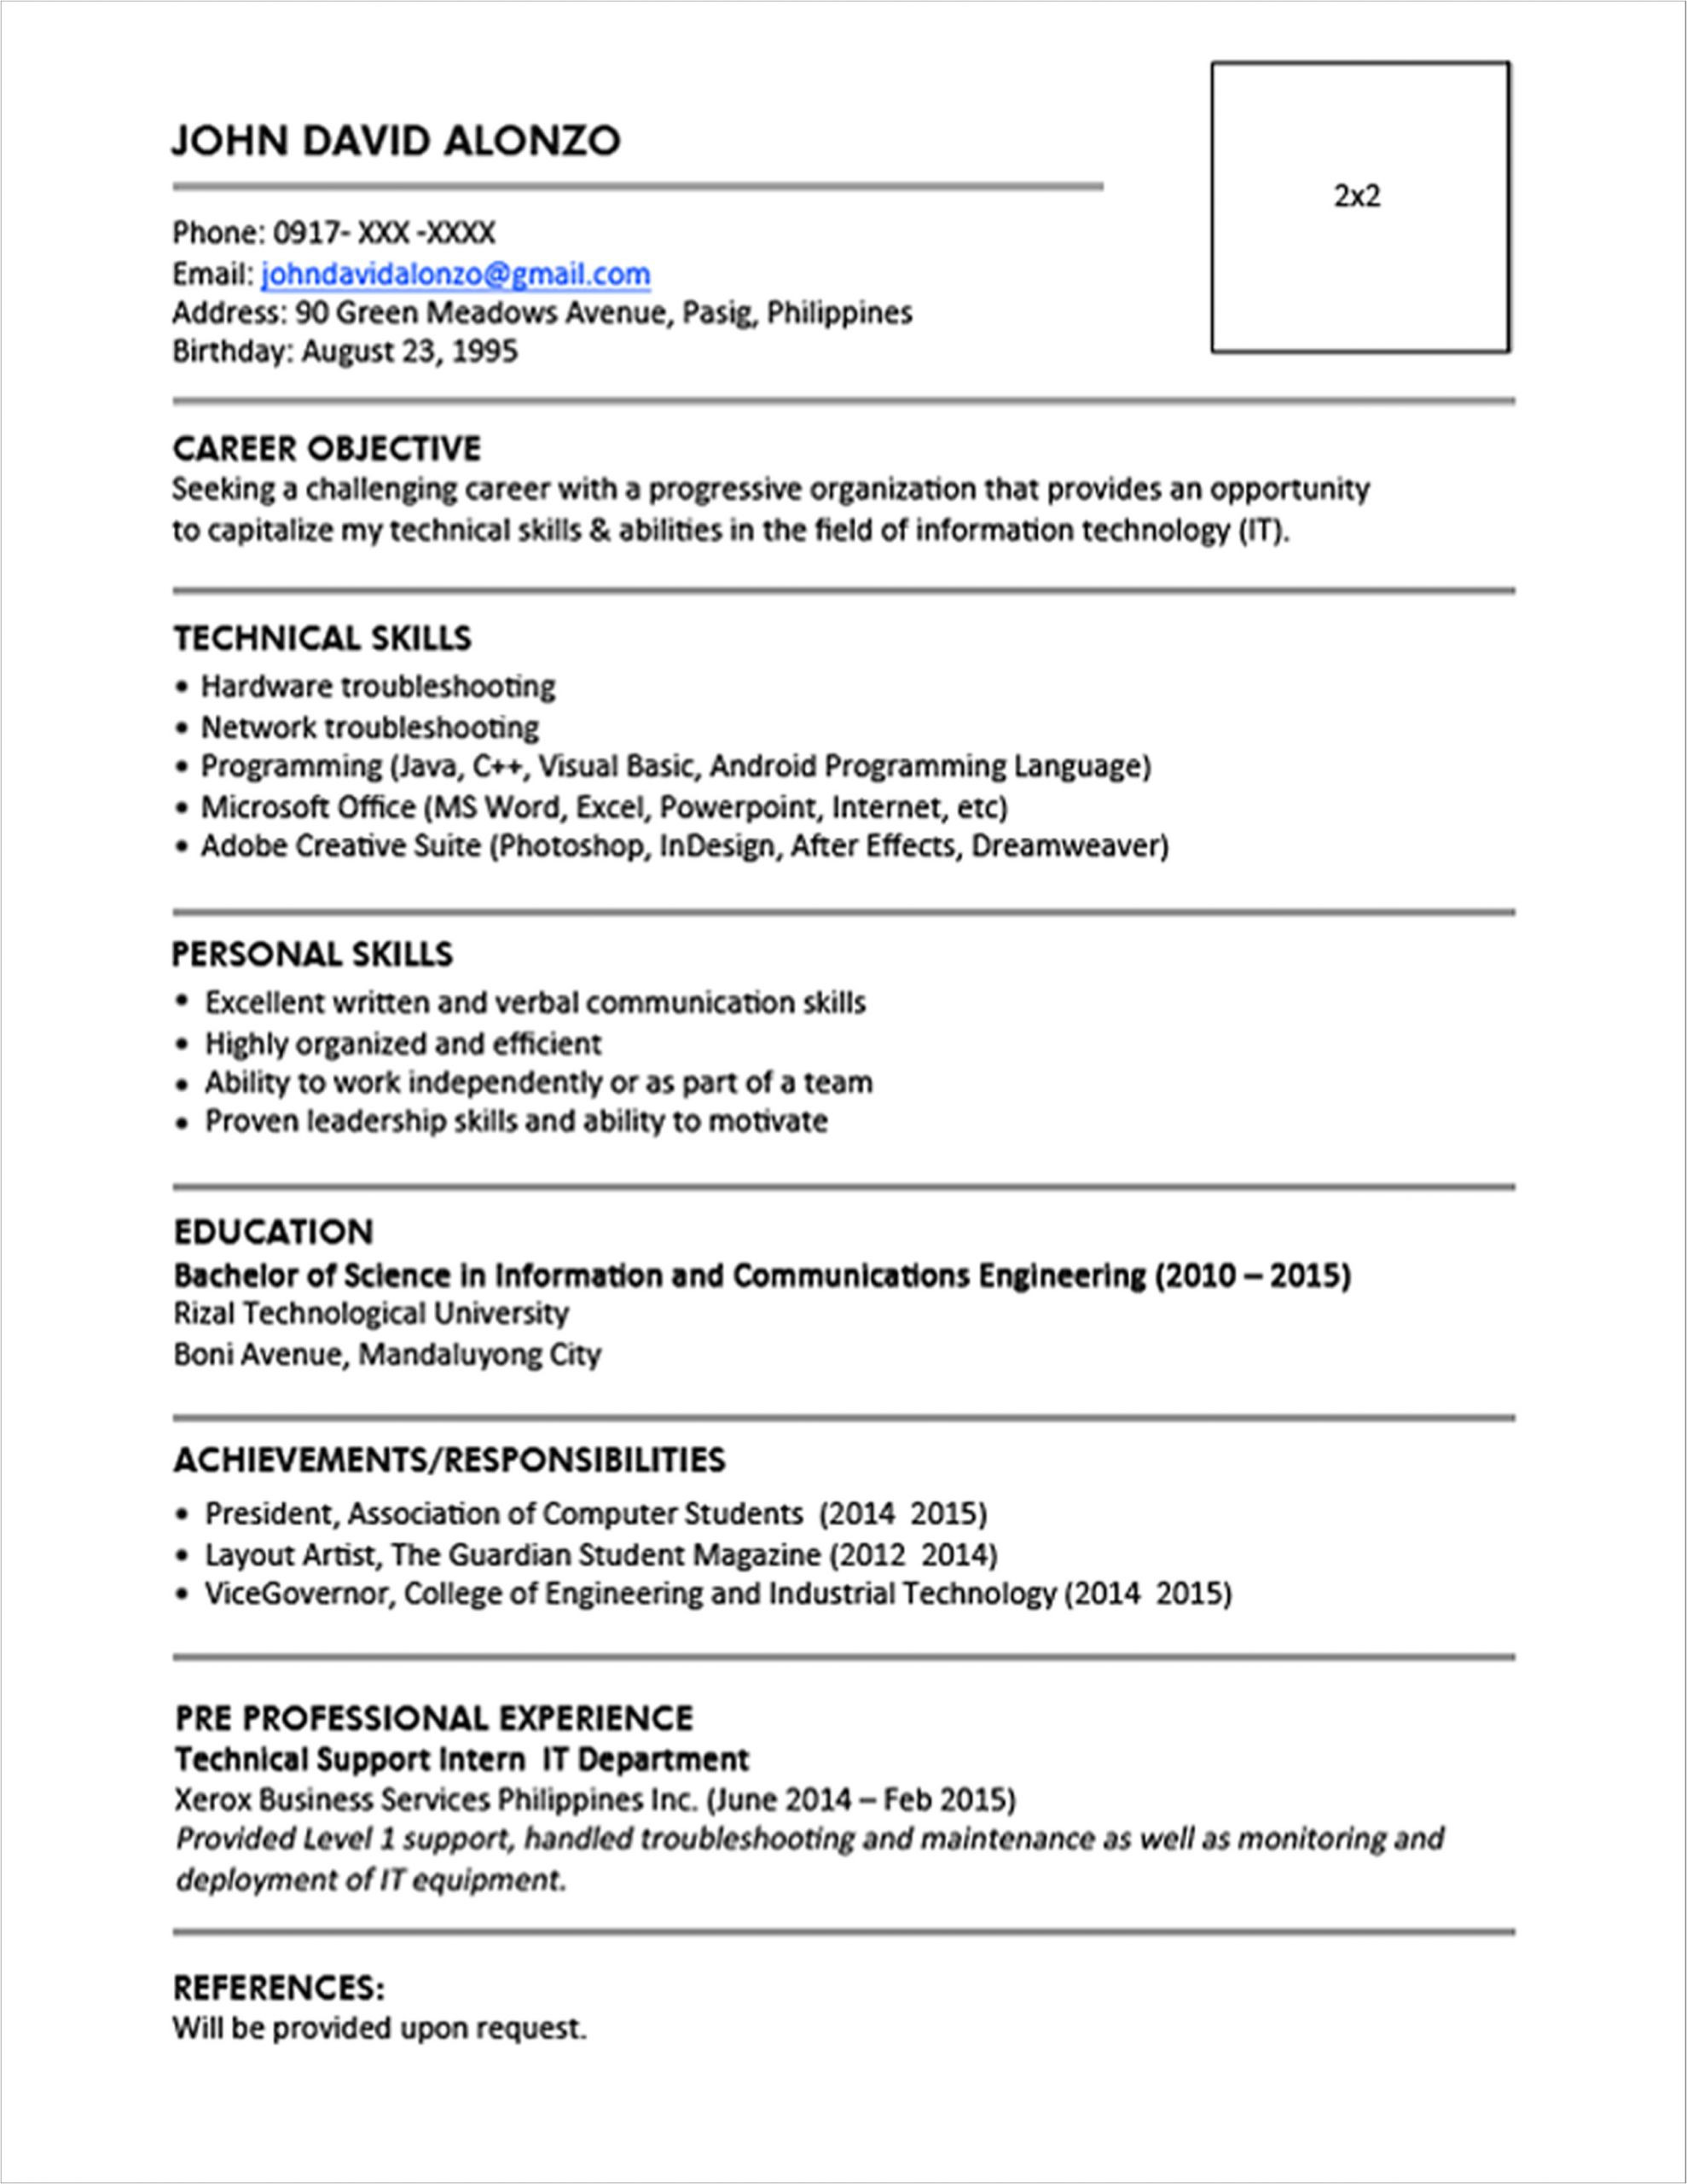 Sample Resume for Lawyers In the Philippines Basic Resume Philippines